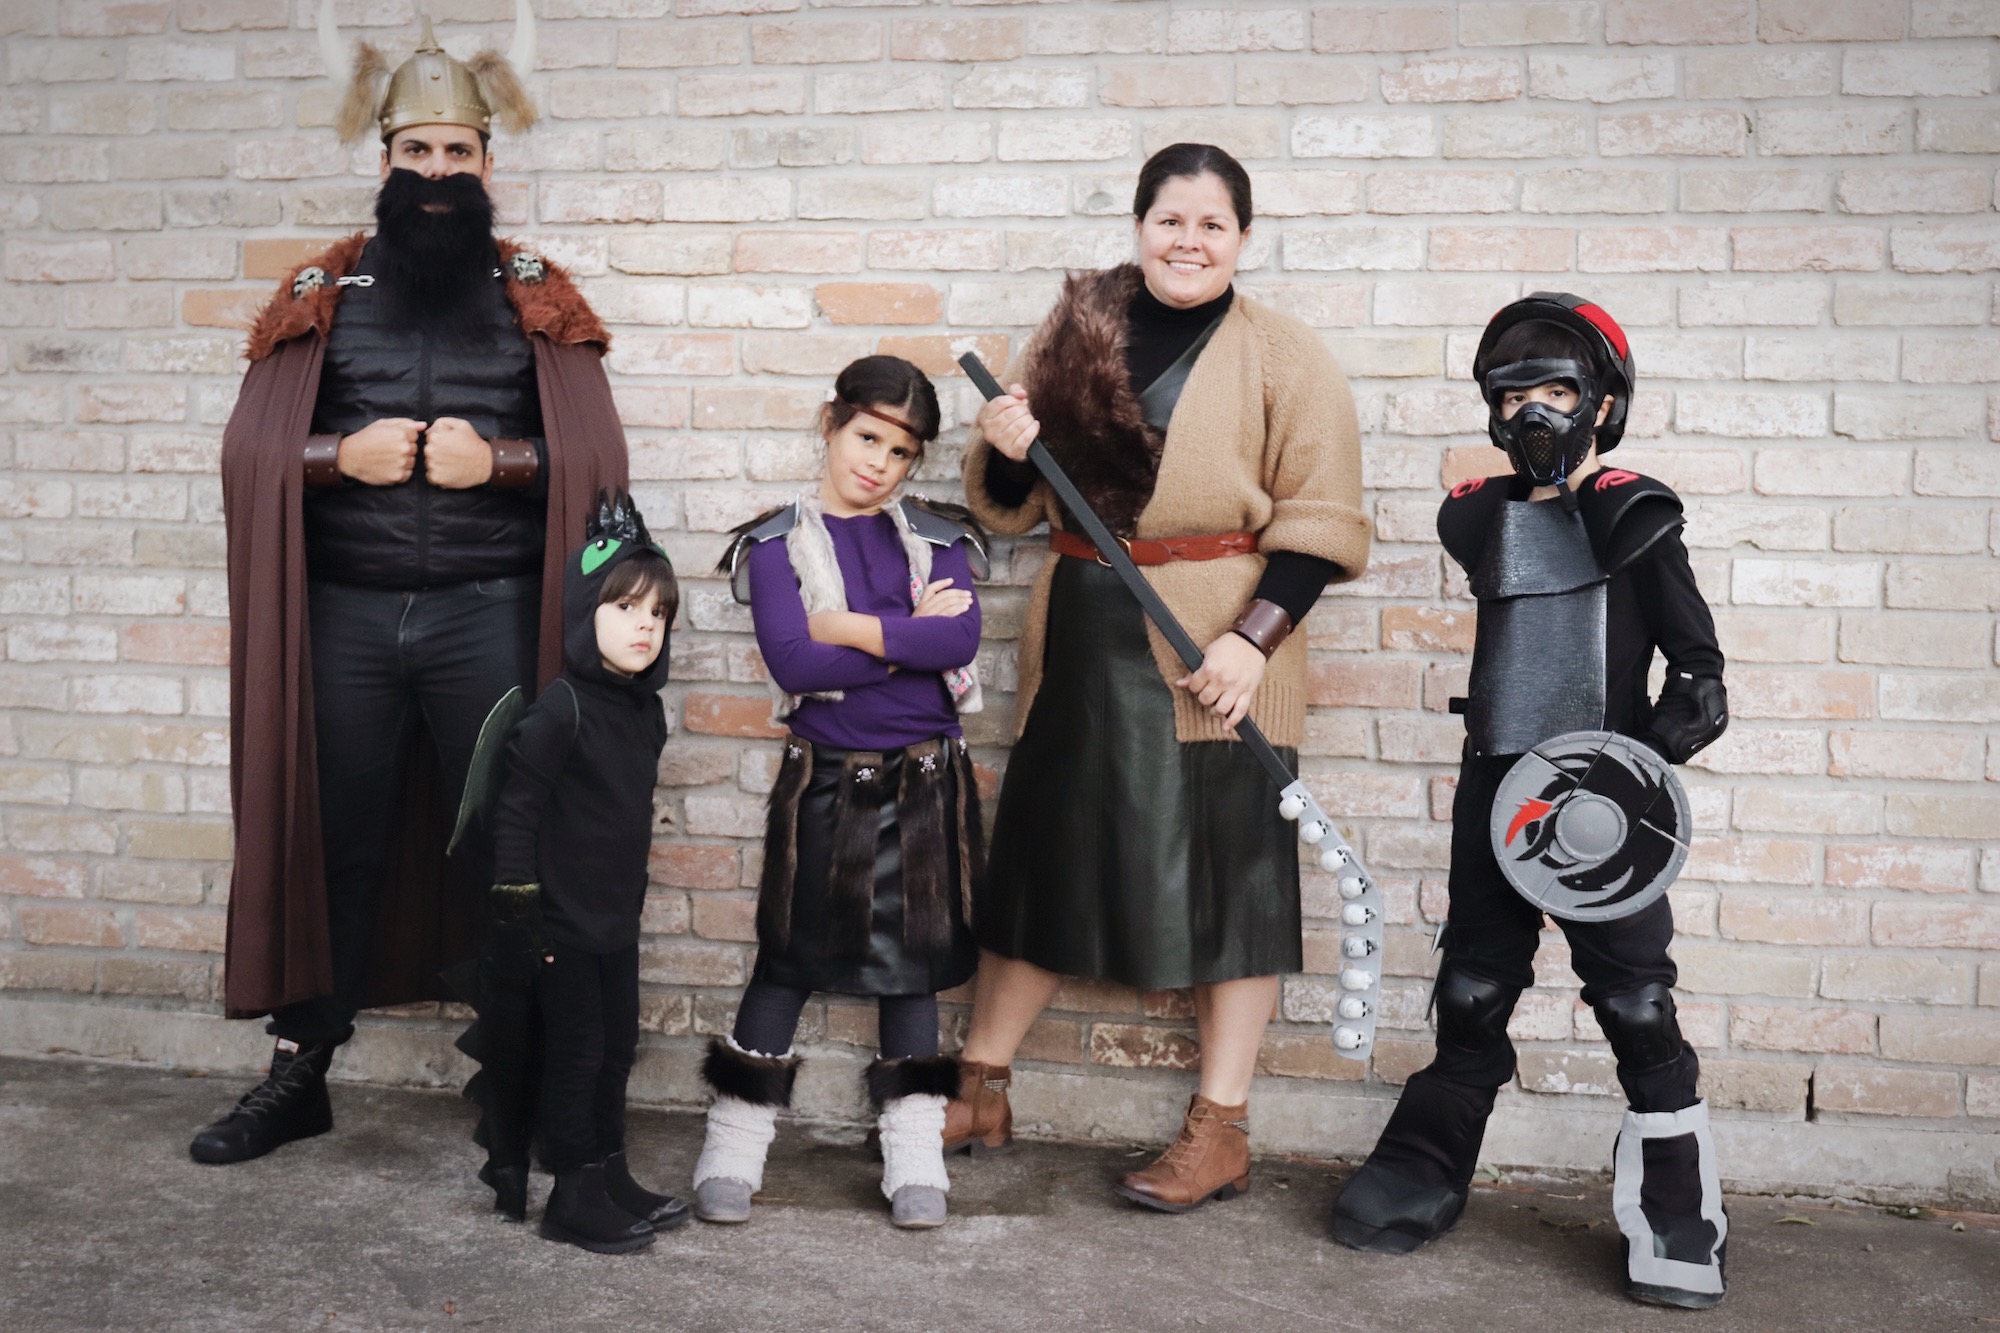 How to train your dragon Family Costume